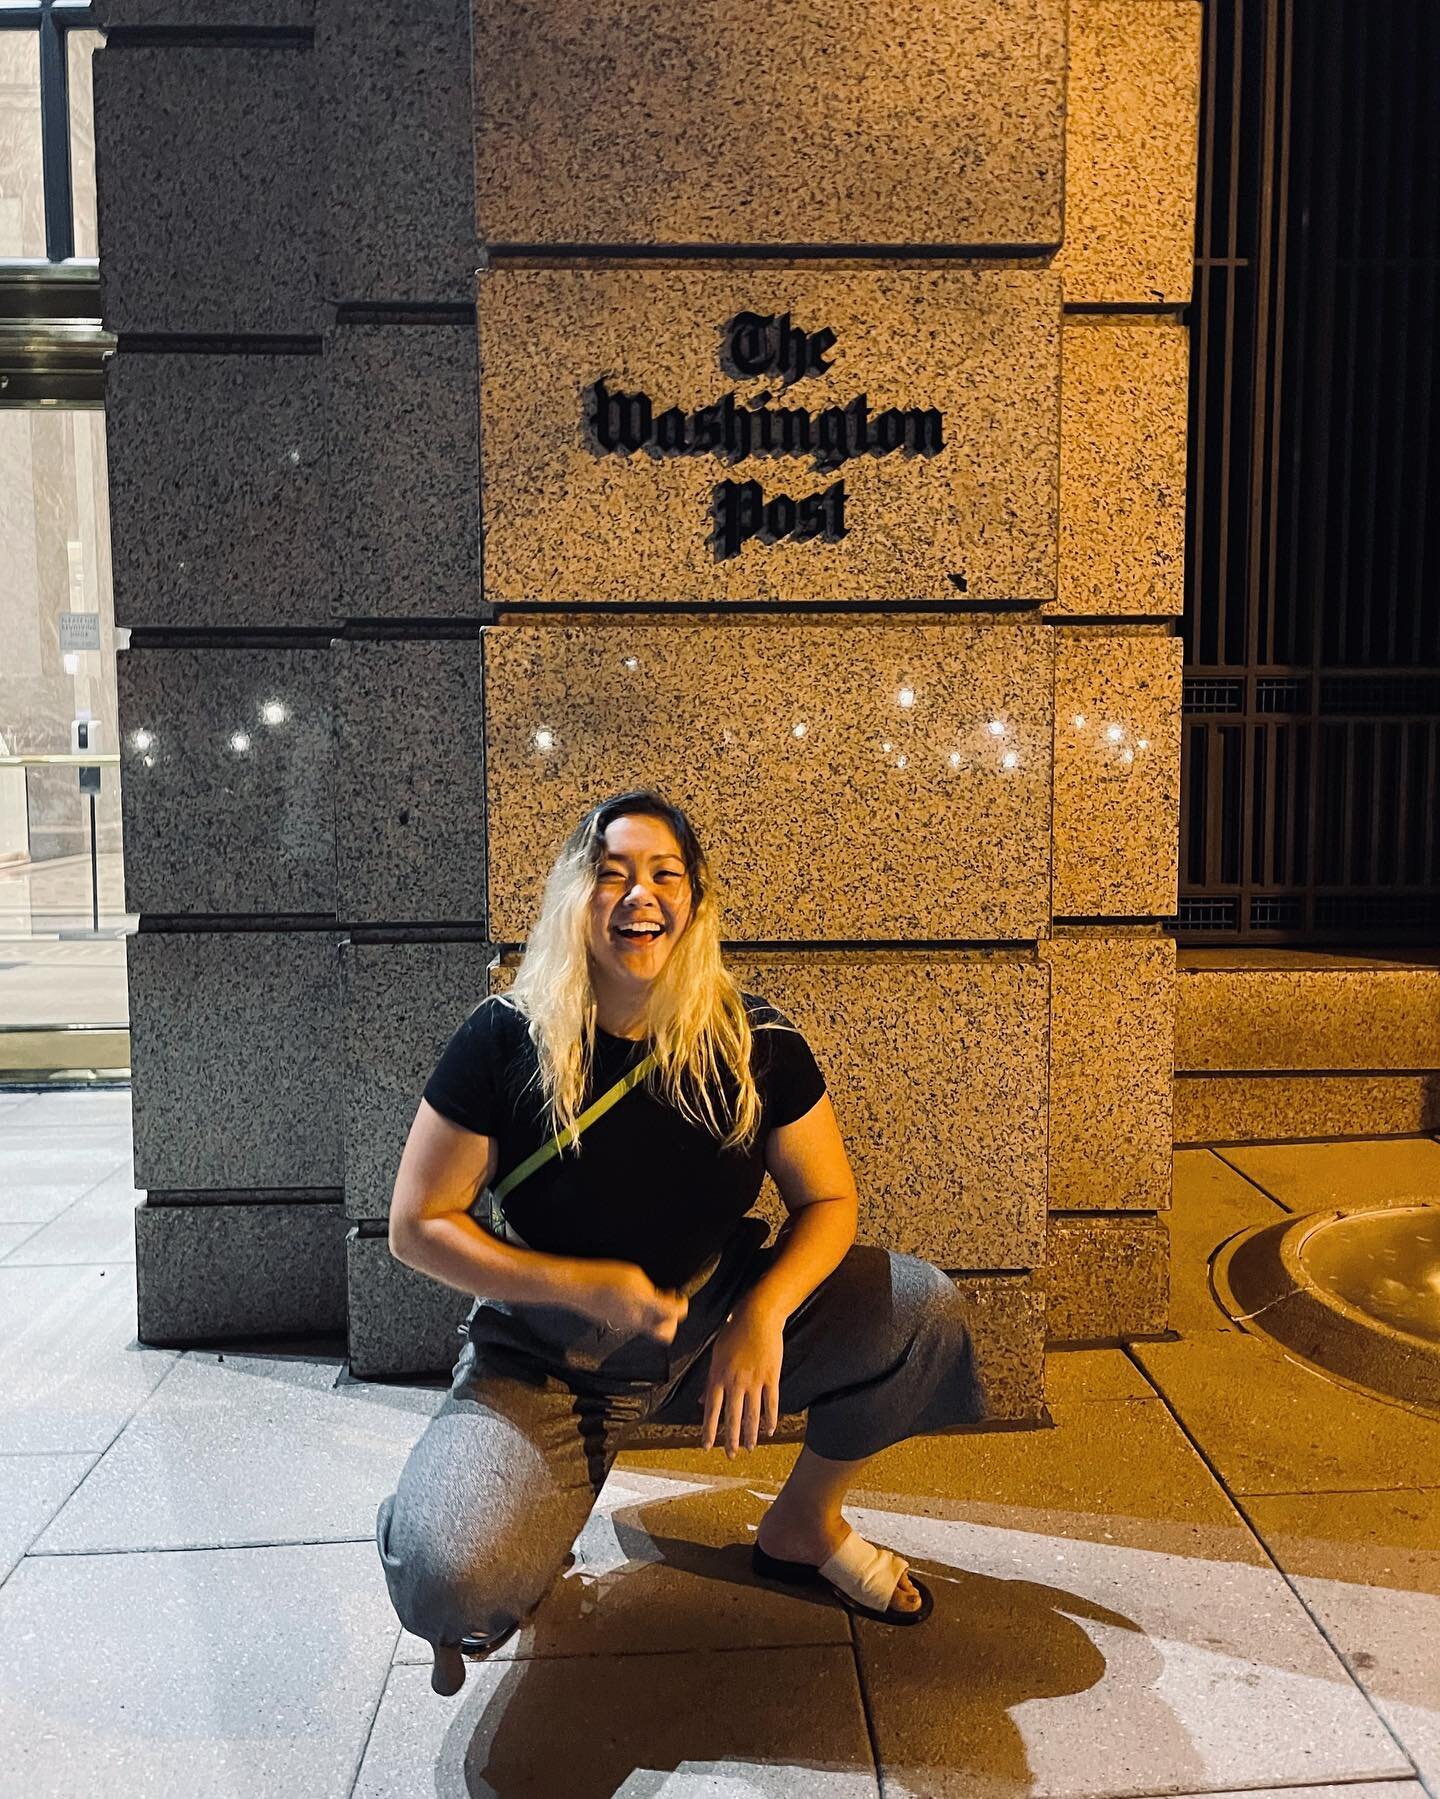 My turn for a life update🌟

After 8 years of being away, I&rsquo;m finally moving back to Cali! I&rsquo;ll be working as a photo editor at @washingtonpost&rsquo;s San Francisco bureau starting next month. My time in DC was short-lived, but I&rsquo;m